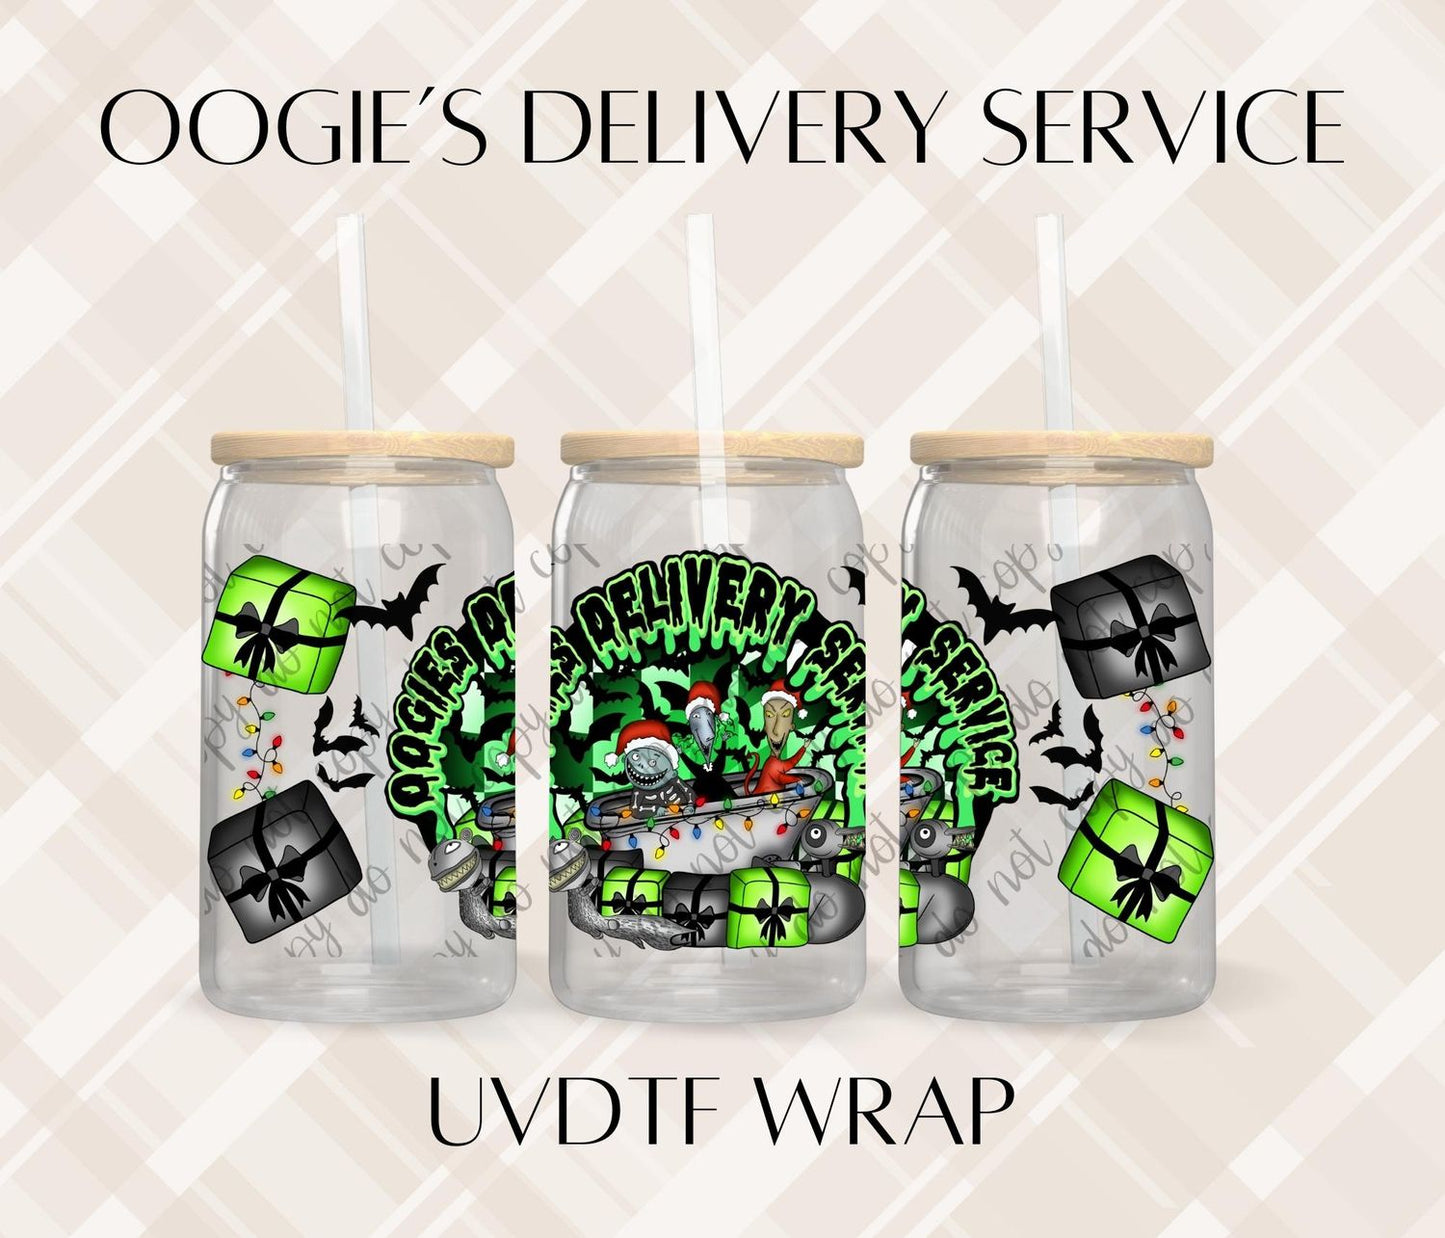 OOGIE'S DELIVERY SERVICE UVDTF WRAP